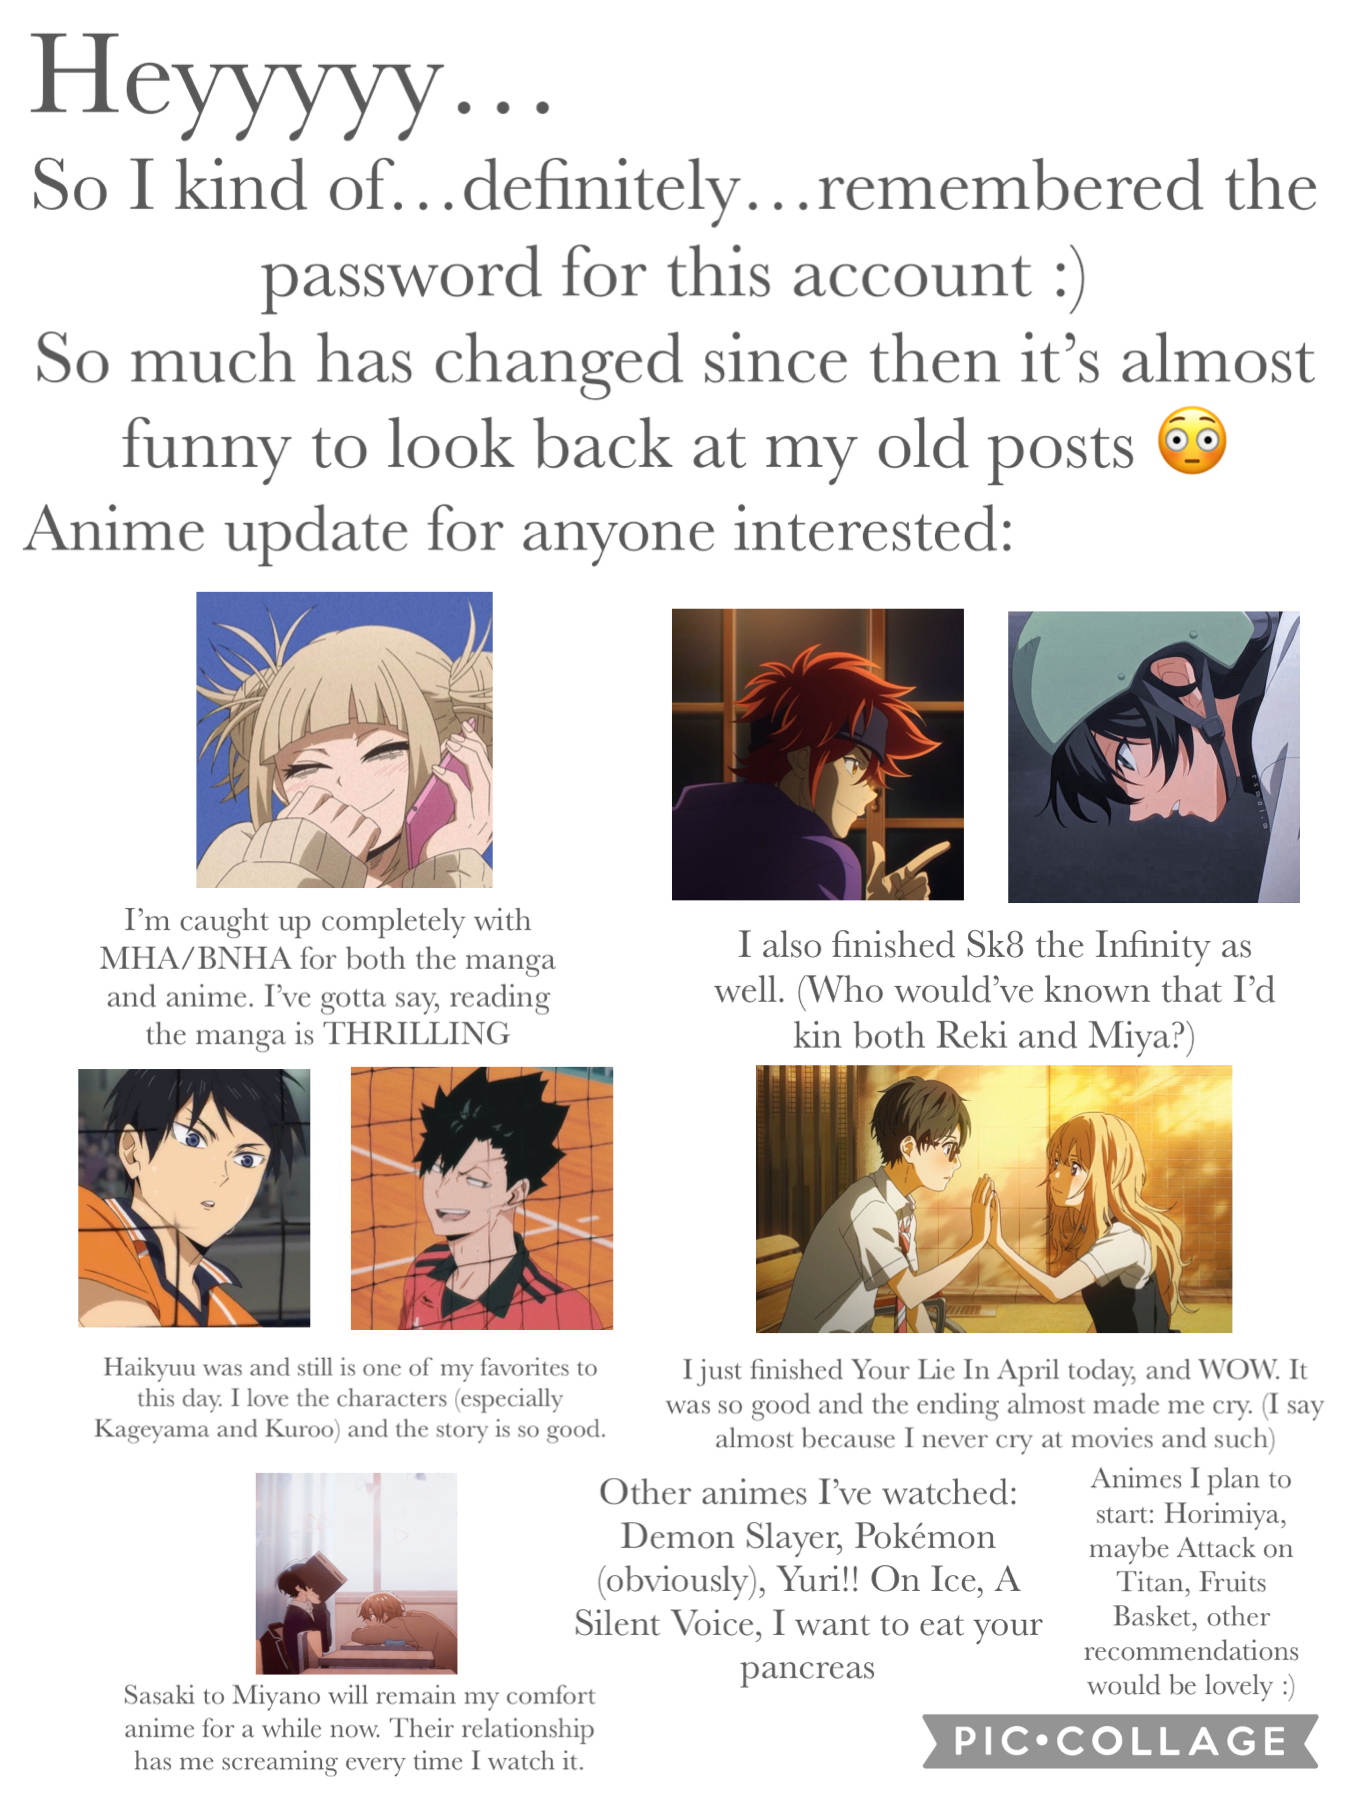 I know there aren’t a lot of anime fans on picollage, but at least let me share this with someone lol